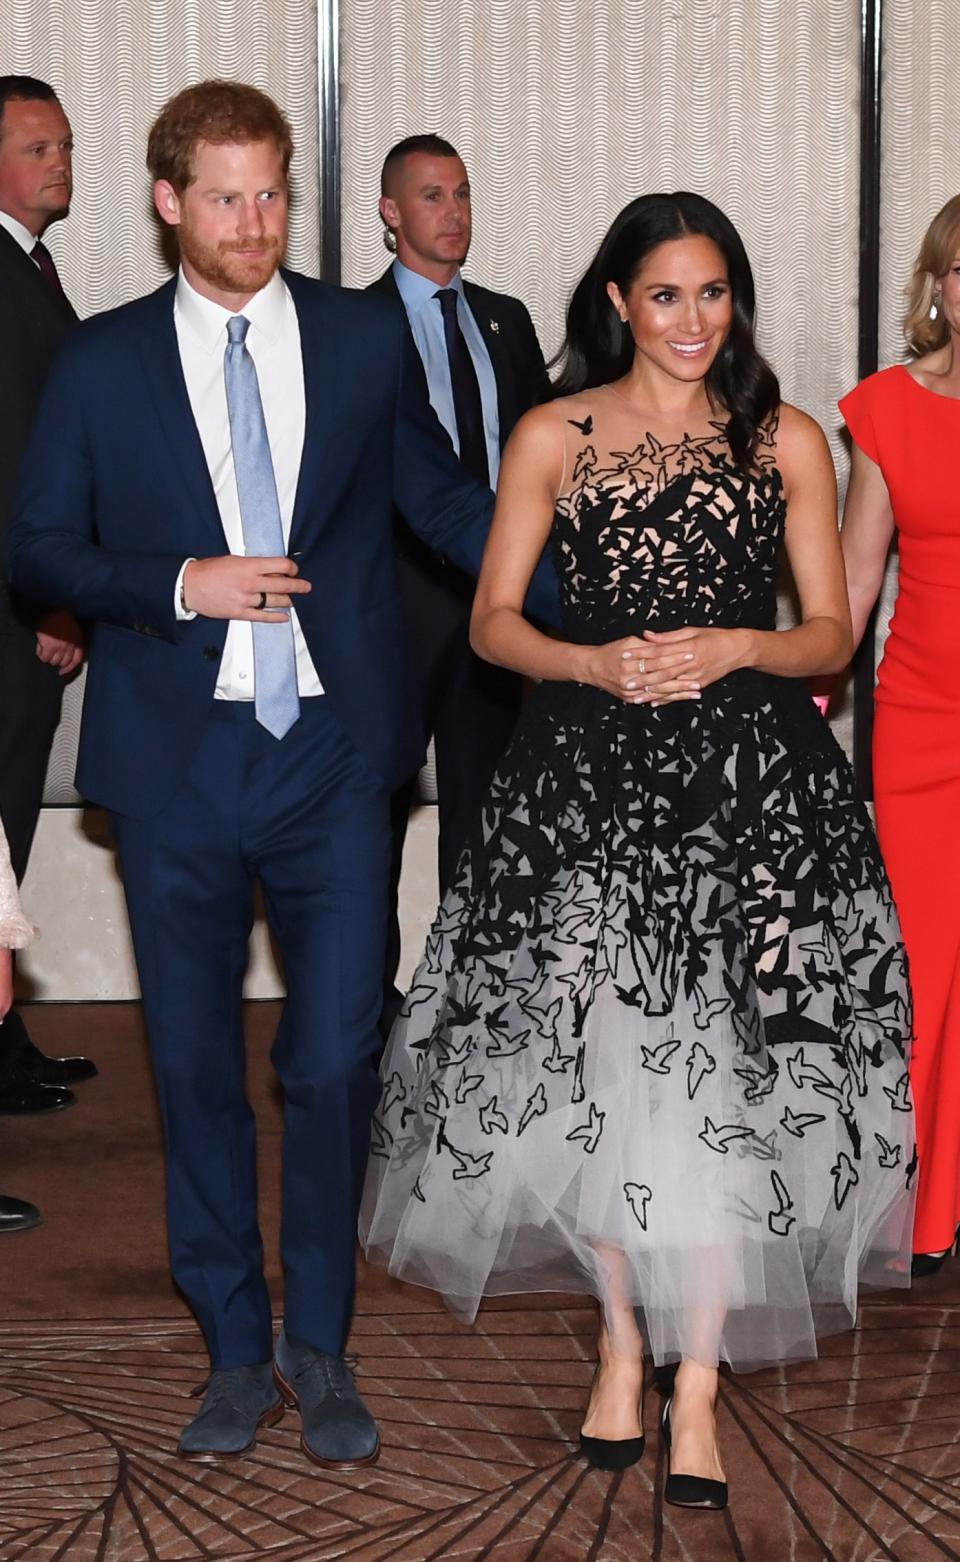 Markle flexed her red-carpet muscles for the Australian Geographic Society Awards, where she arrived in a tulle gown by Oscar de la Renta.